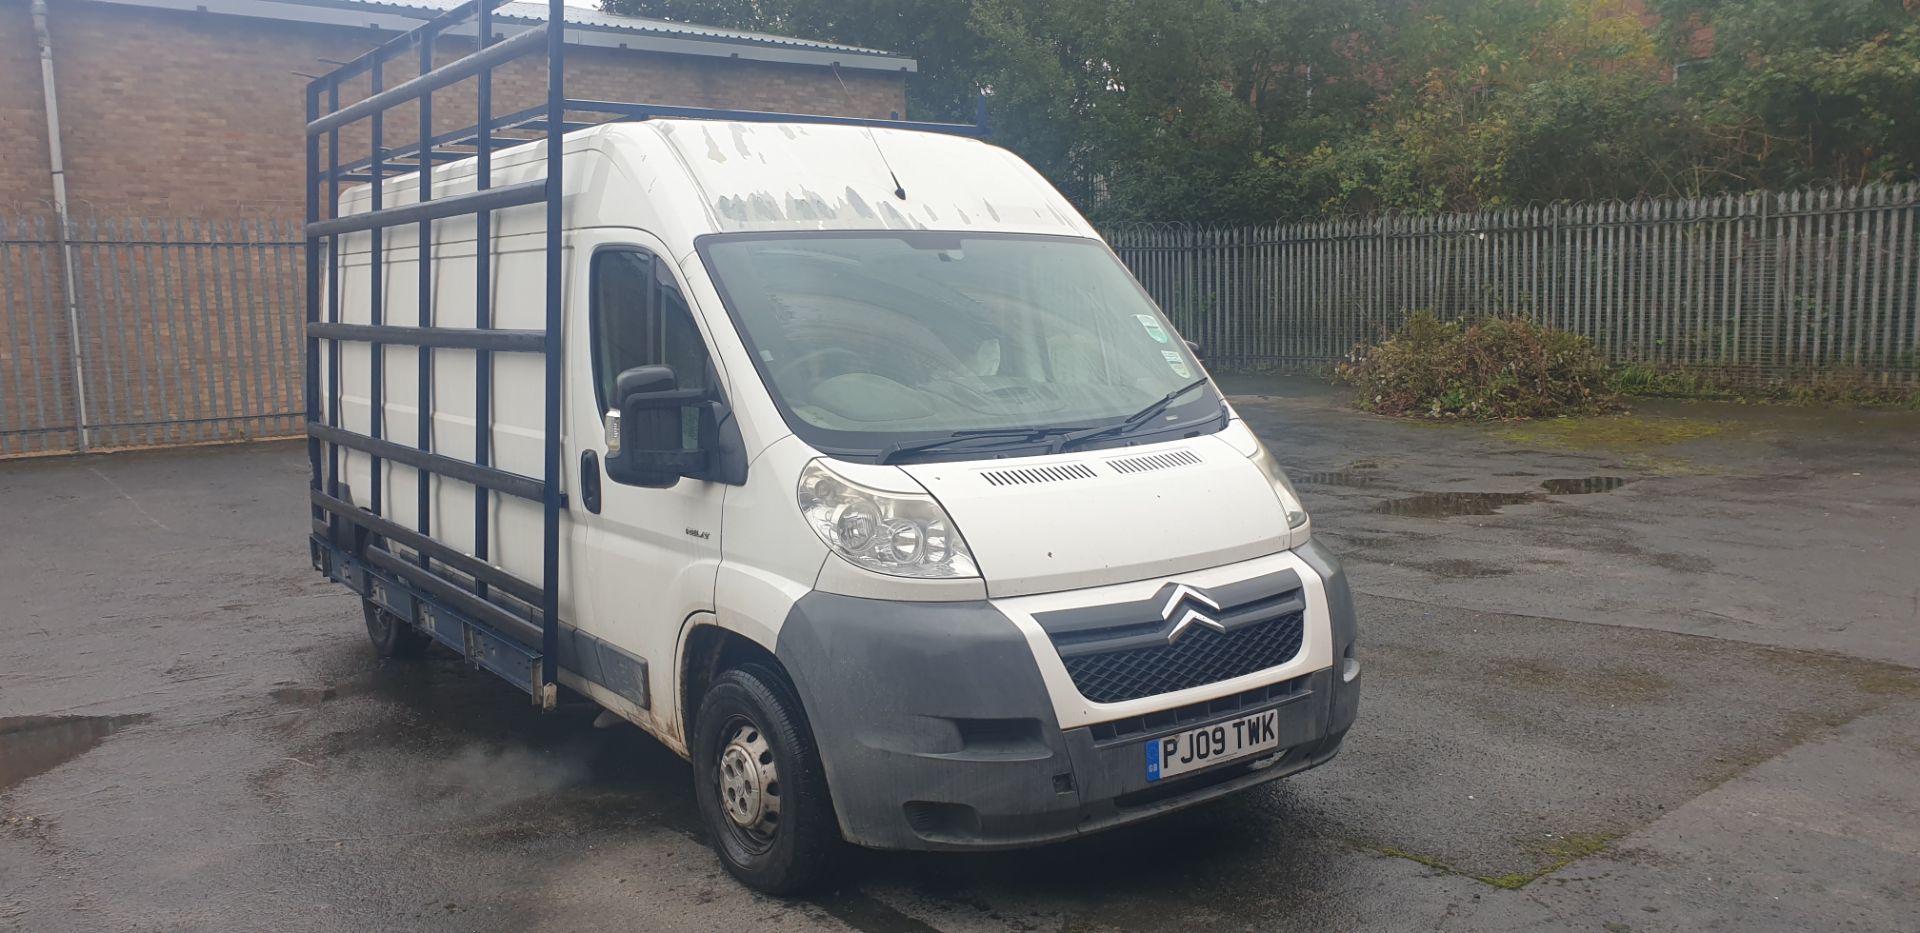 2009 Citroen Relay 35 HDI 120 LWB panel van with glass racks to side and roof - Image 3 of 30